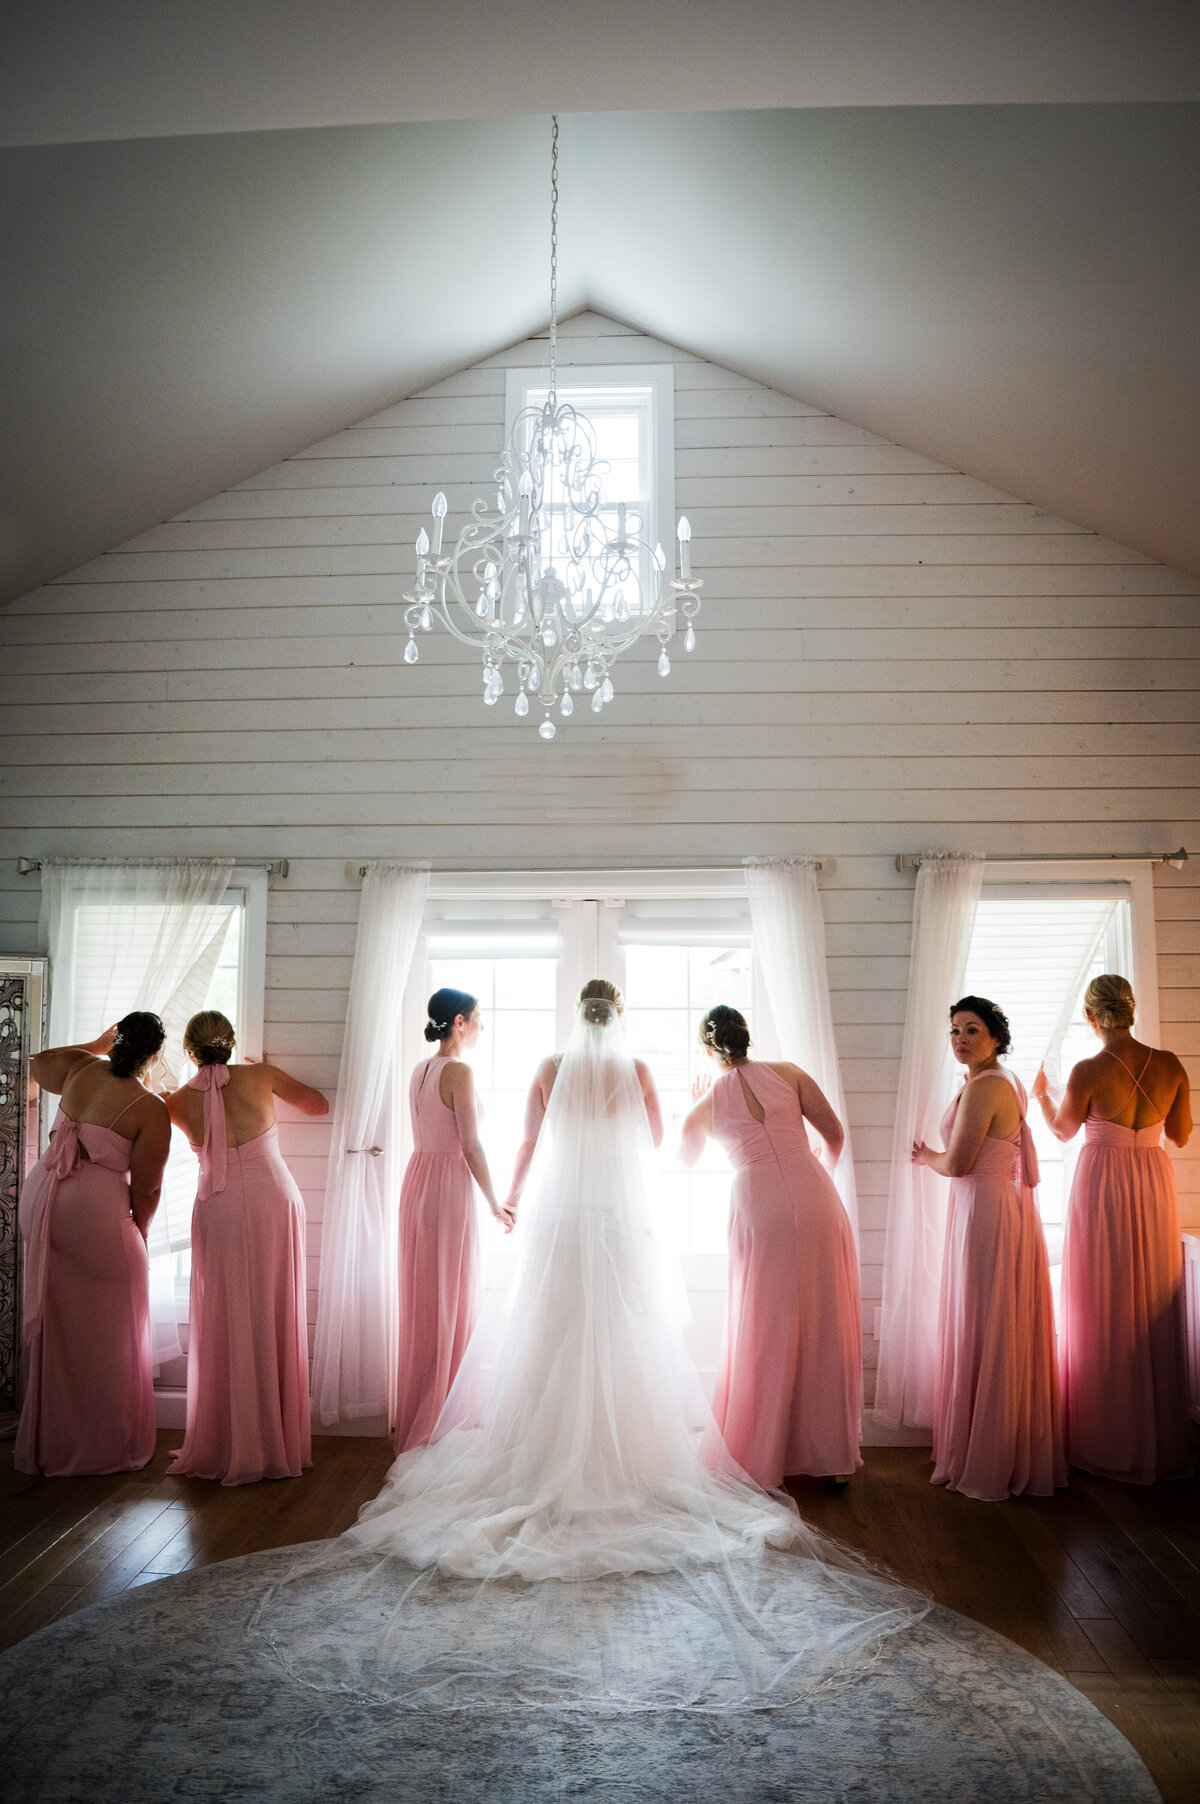 A bride and her bridesmaids stare out the windows at The Barn at Raccoon Creek in Denver, Colorado.